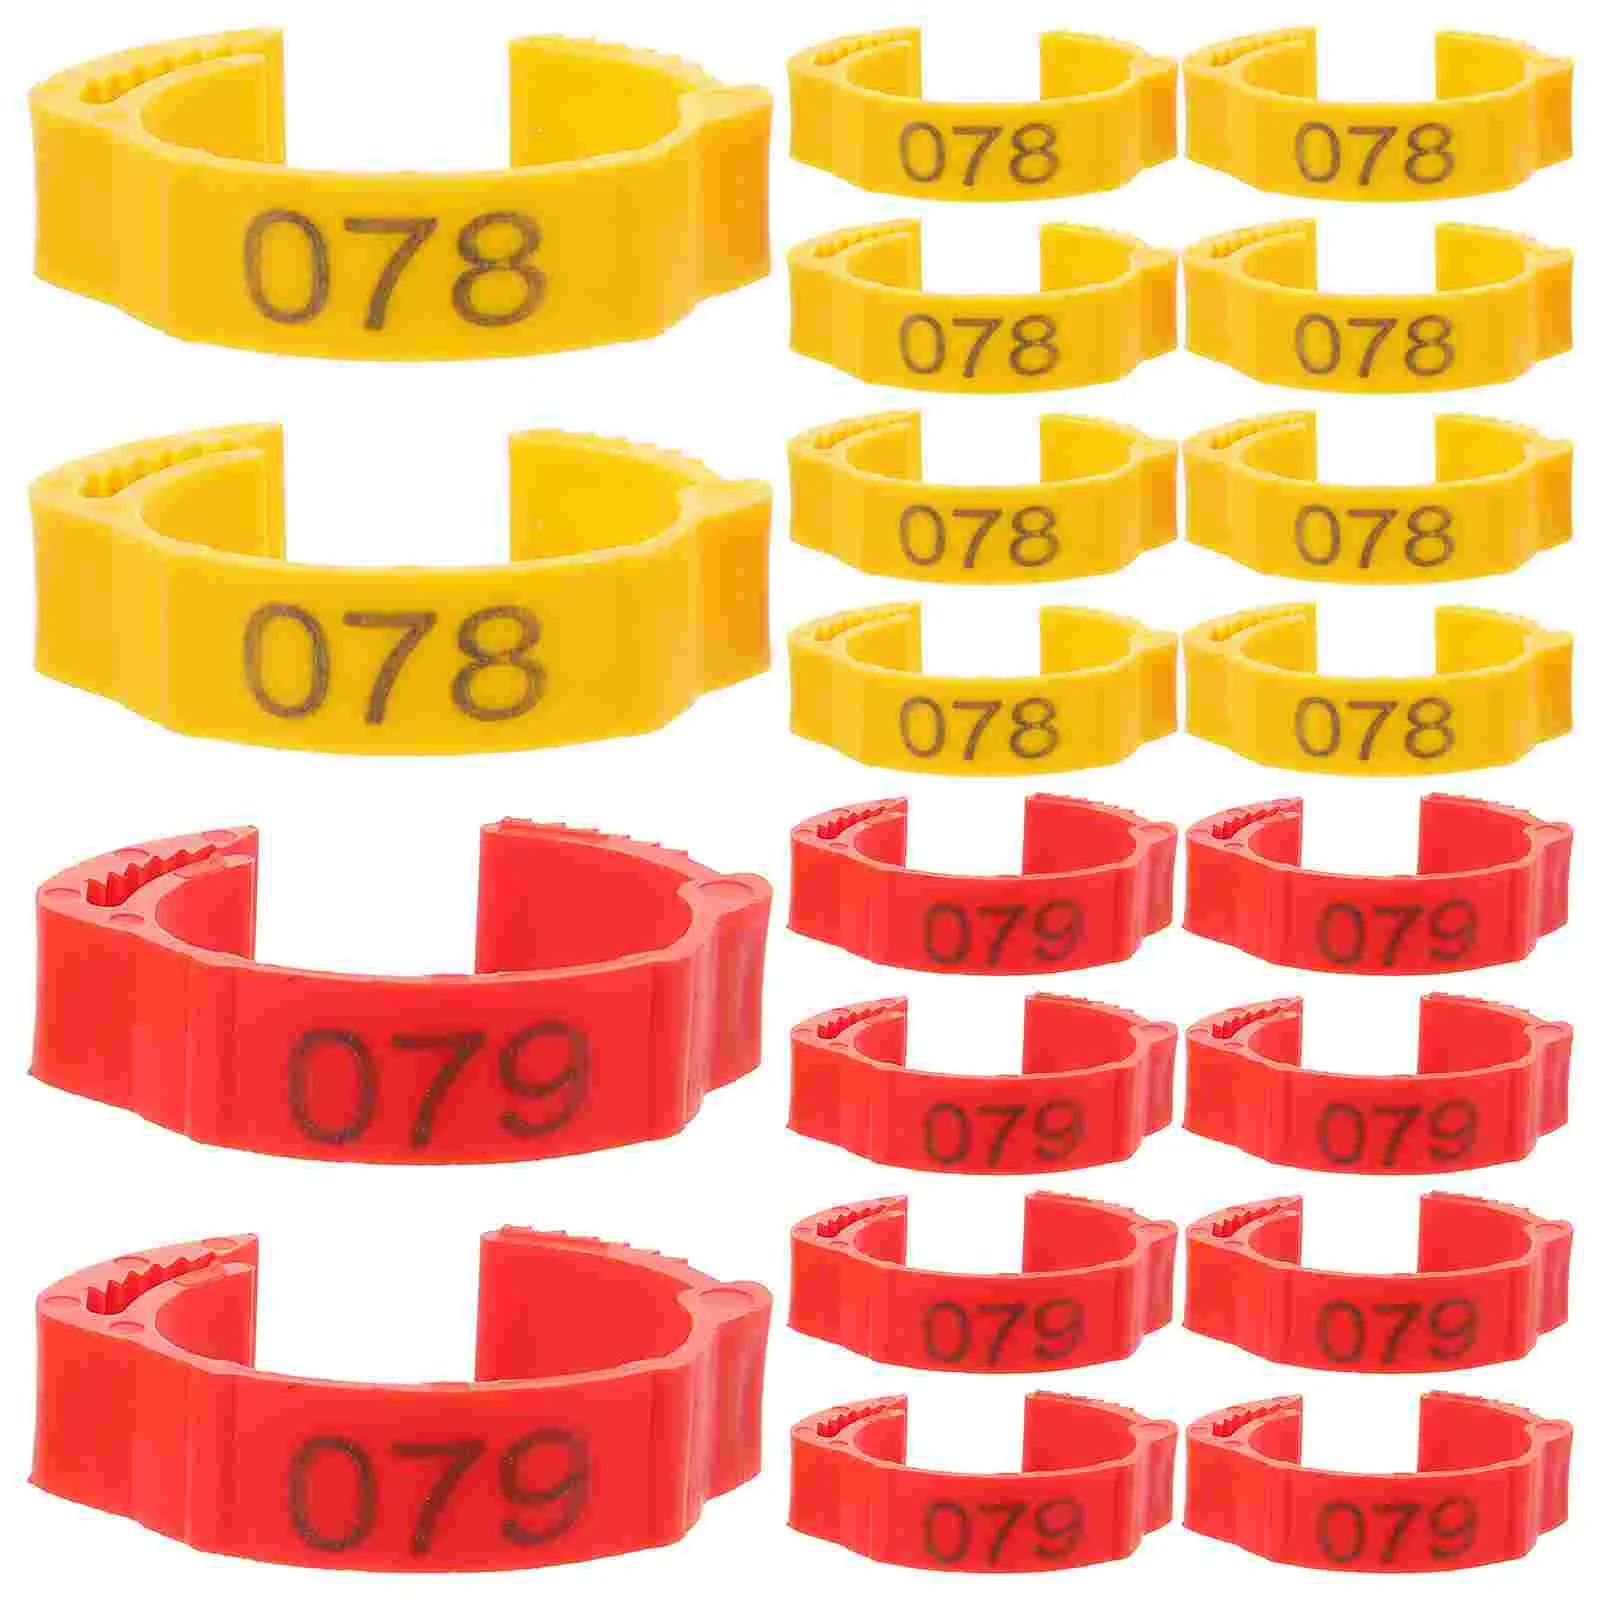 

200pcs Colored Chicken Leg Tags Chicken Leg Number Bands Farm Poultry Leg Rings